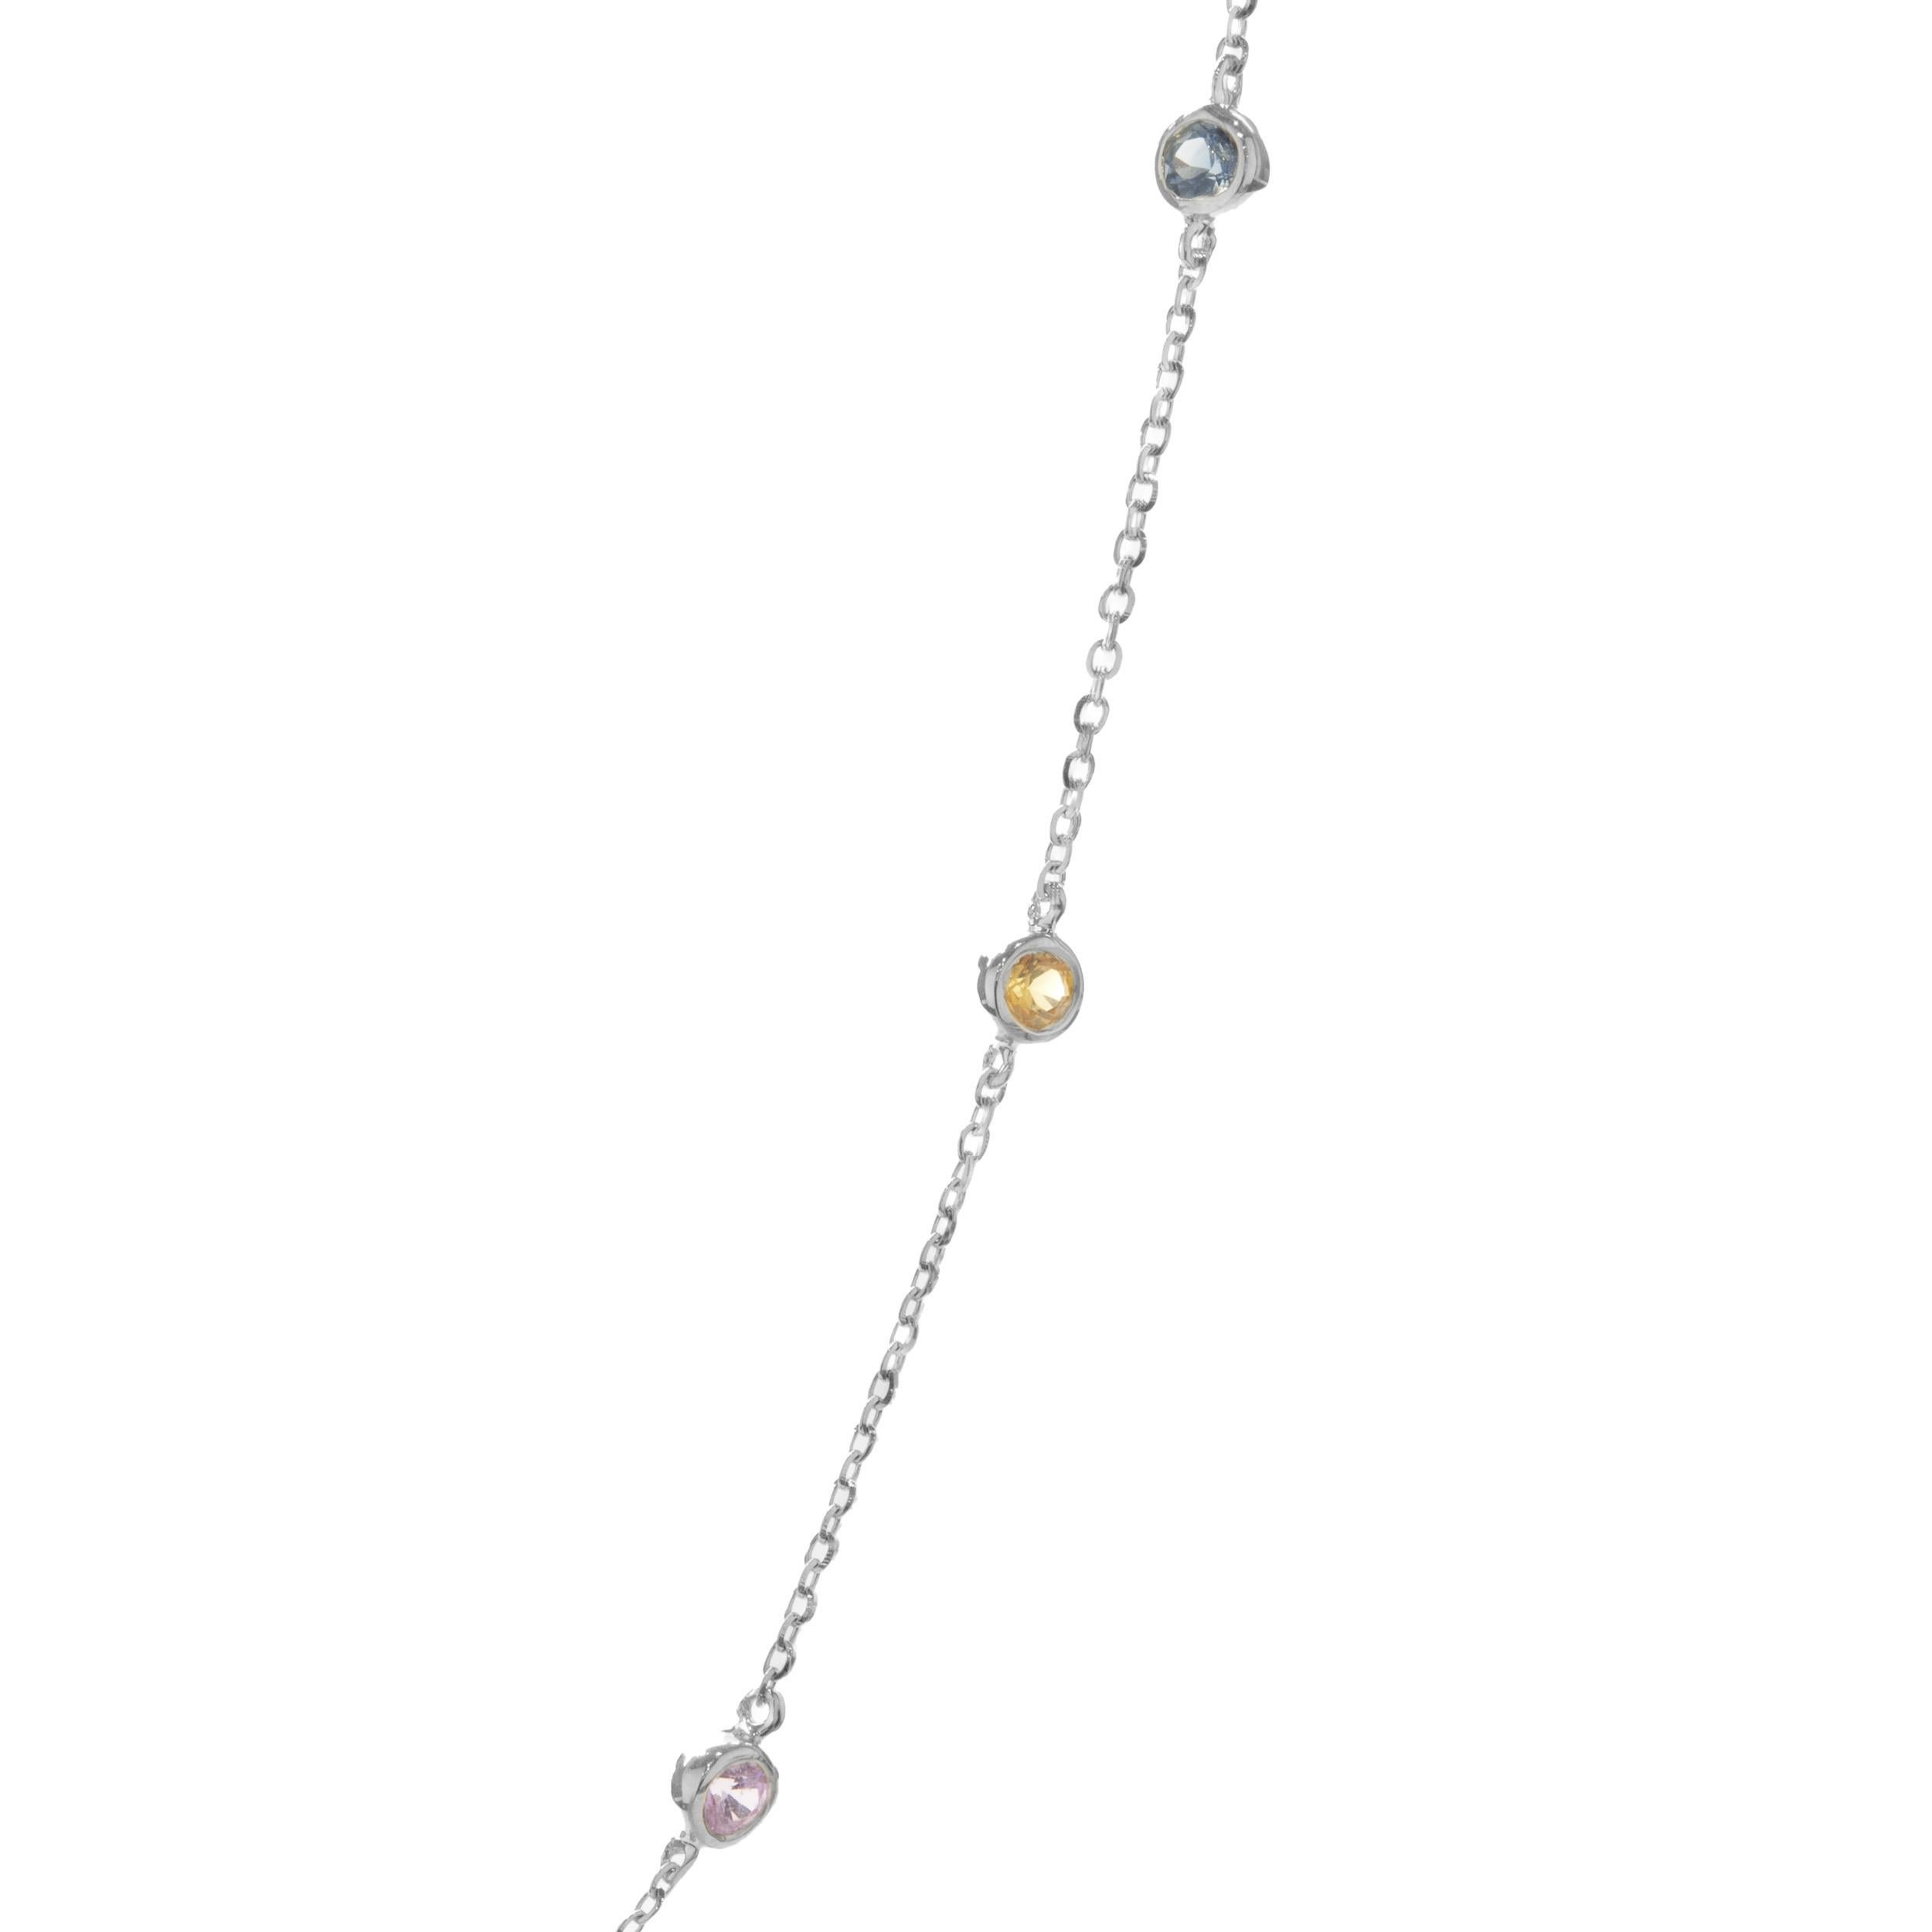 Designer: custom 
Material: 14K white gold
Dimensions: necklace measures 22-inches long 
Weight: 2.87 grams